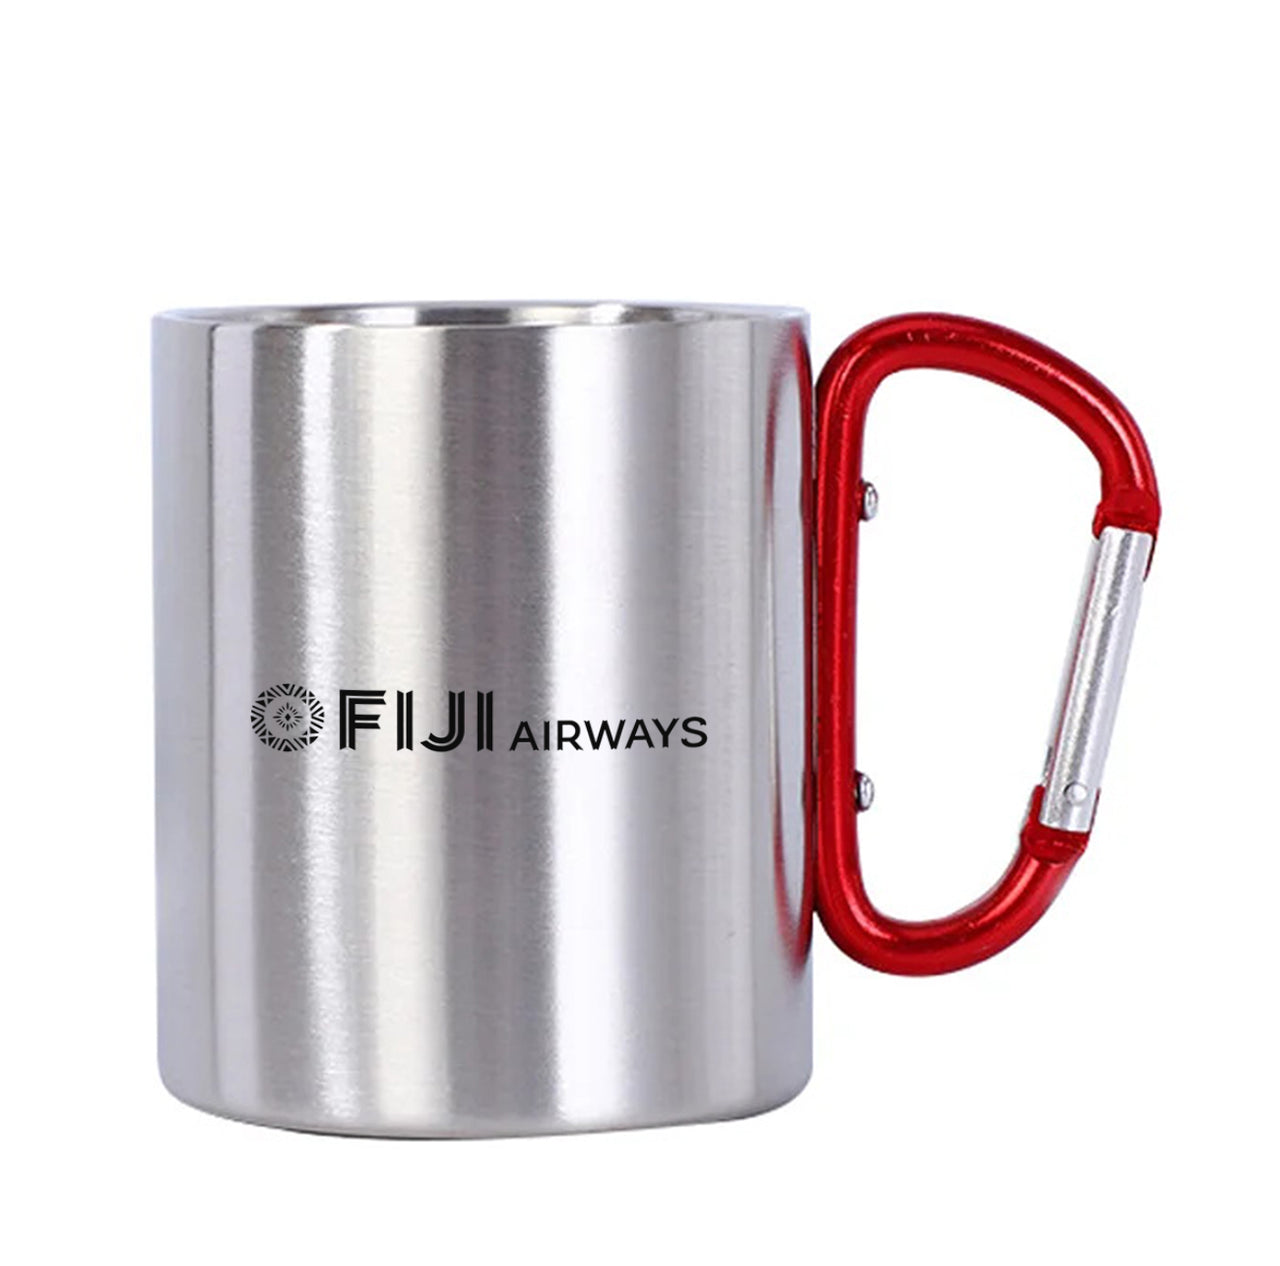 Fiji Airways Airlines Designed Stainless Steel Outdoors Mugs